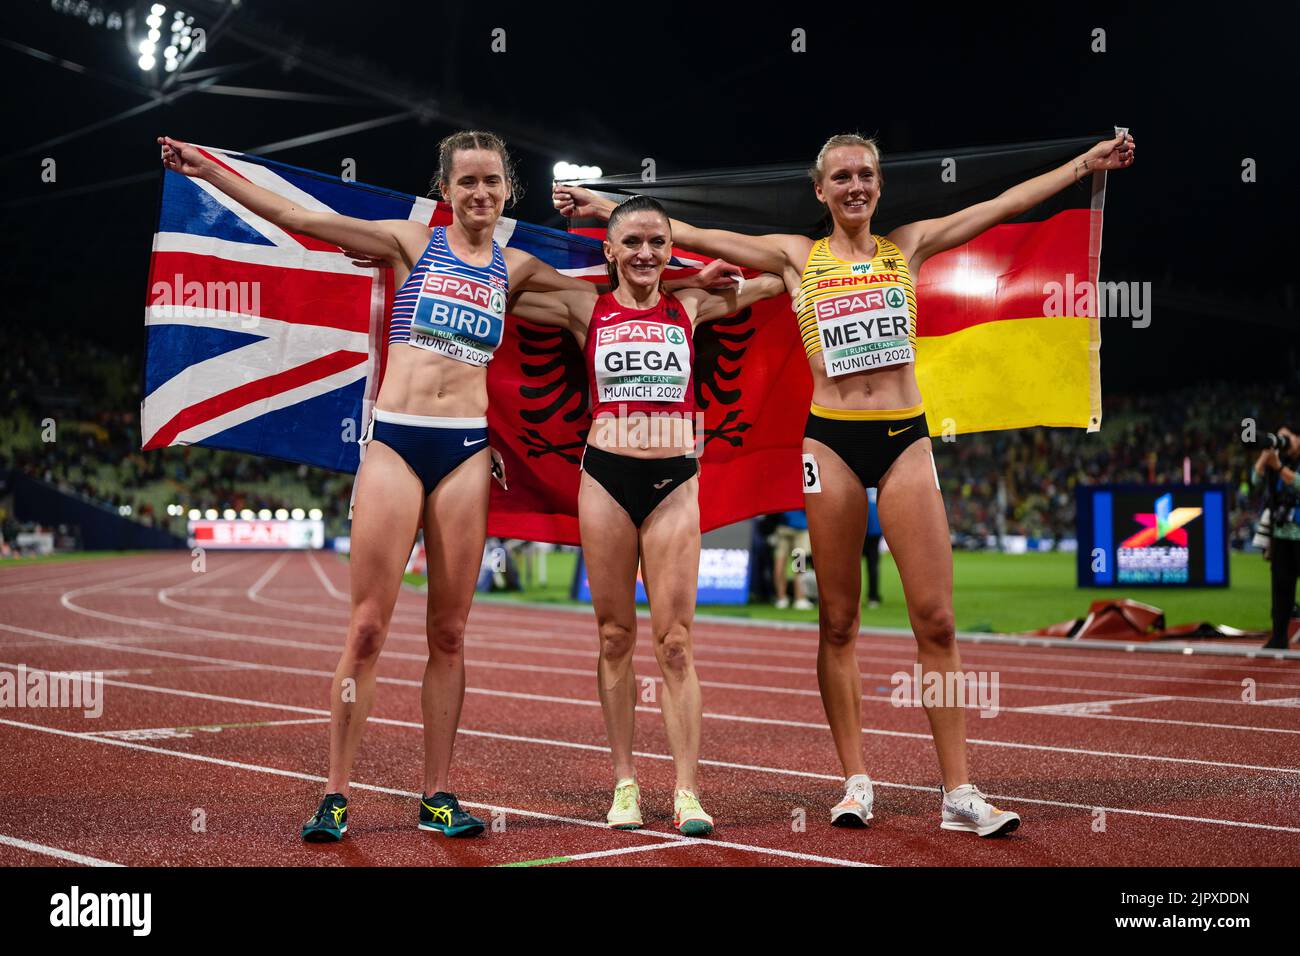 Munich, Germany. 20th Aug, 2022. Athletics: European Championships, Olympic Stadium, 3000m steeplechase, women, final. Third-placed Elizabeth Bird (Great Britain), first-placed Luiza Gega (Albania) and second-placed Lea Meyer (Germany) cheer at the finish line. Credit: Marius Becker/dpa/Alamy Live News Stock Photo